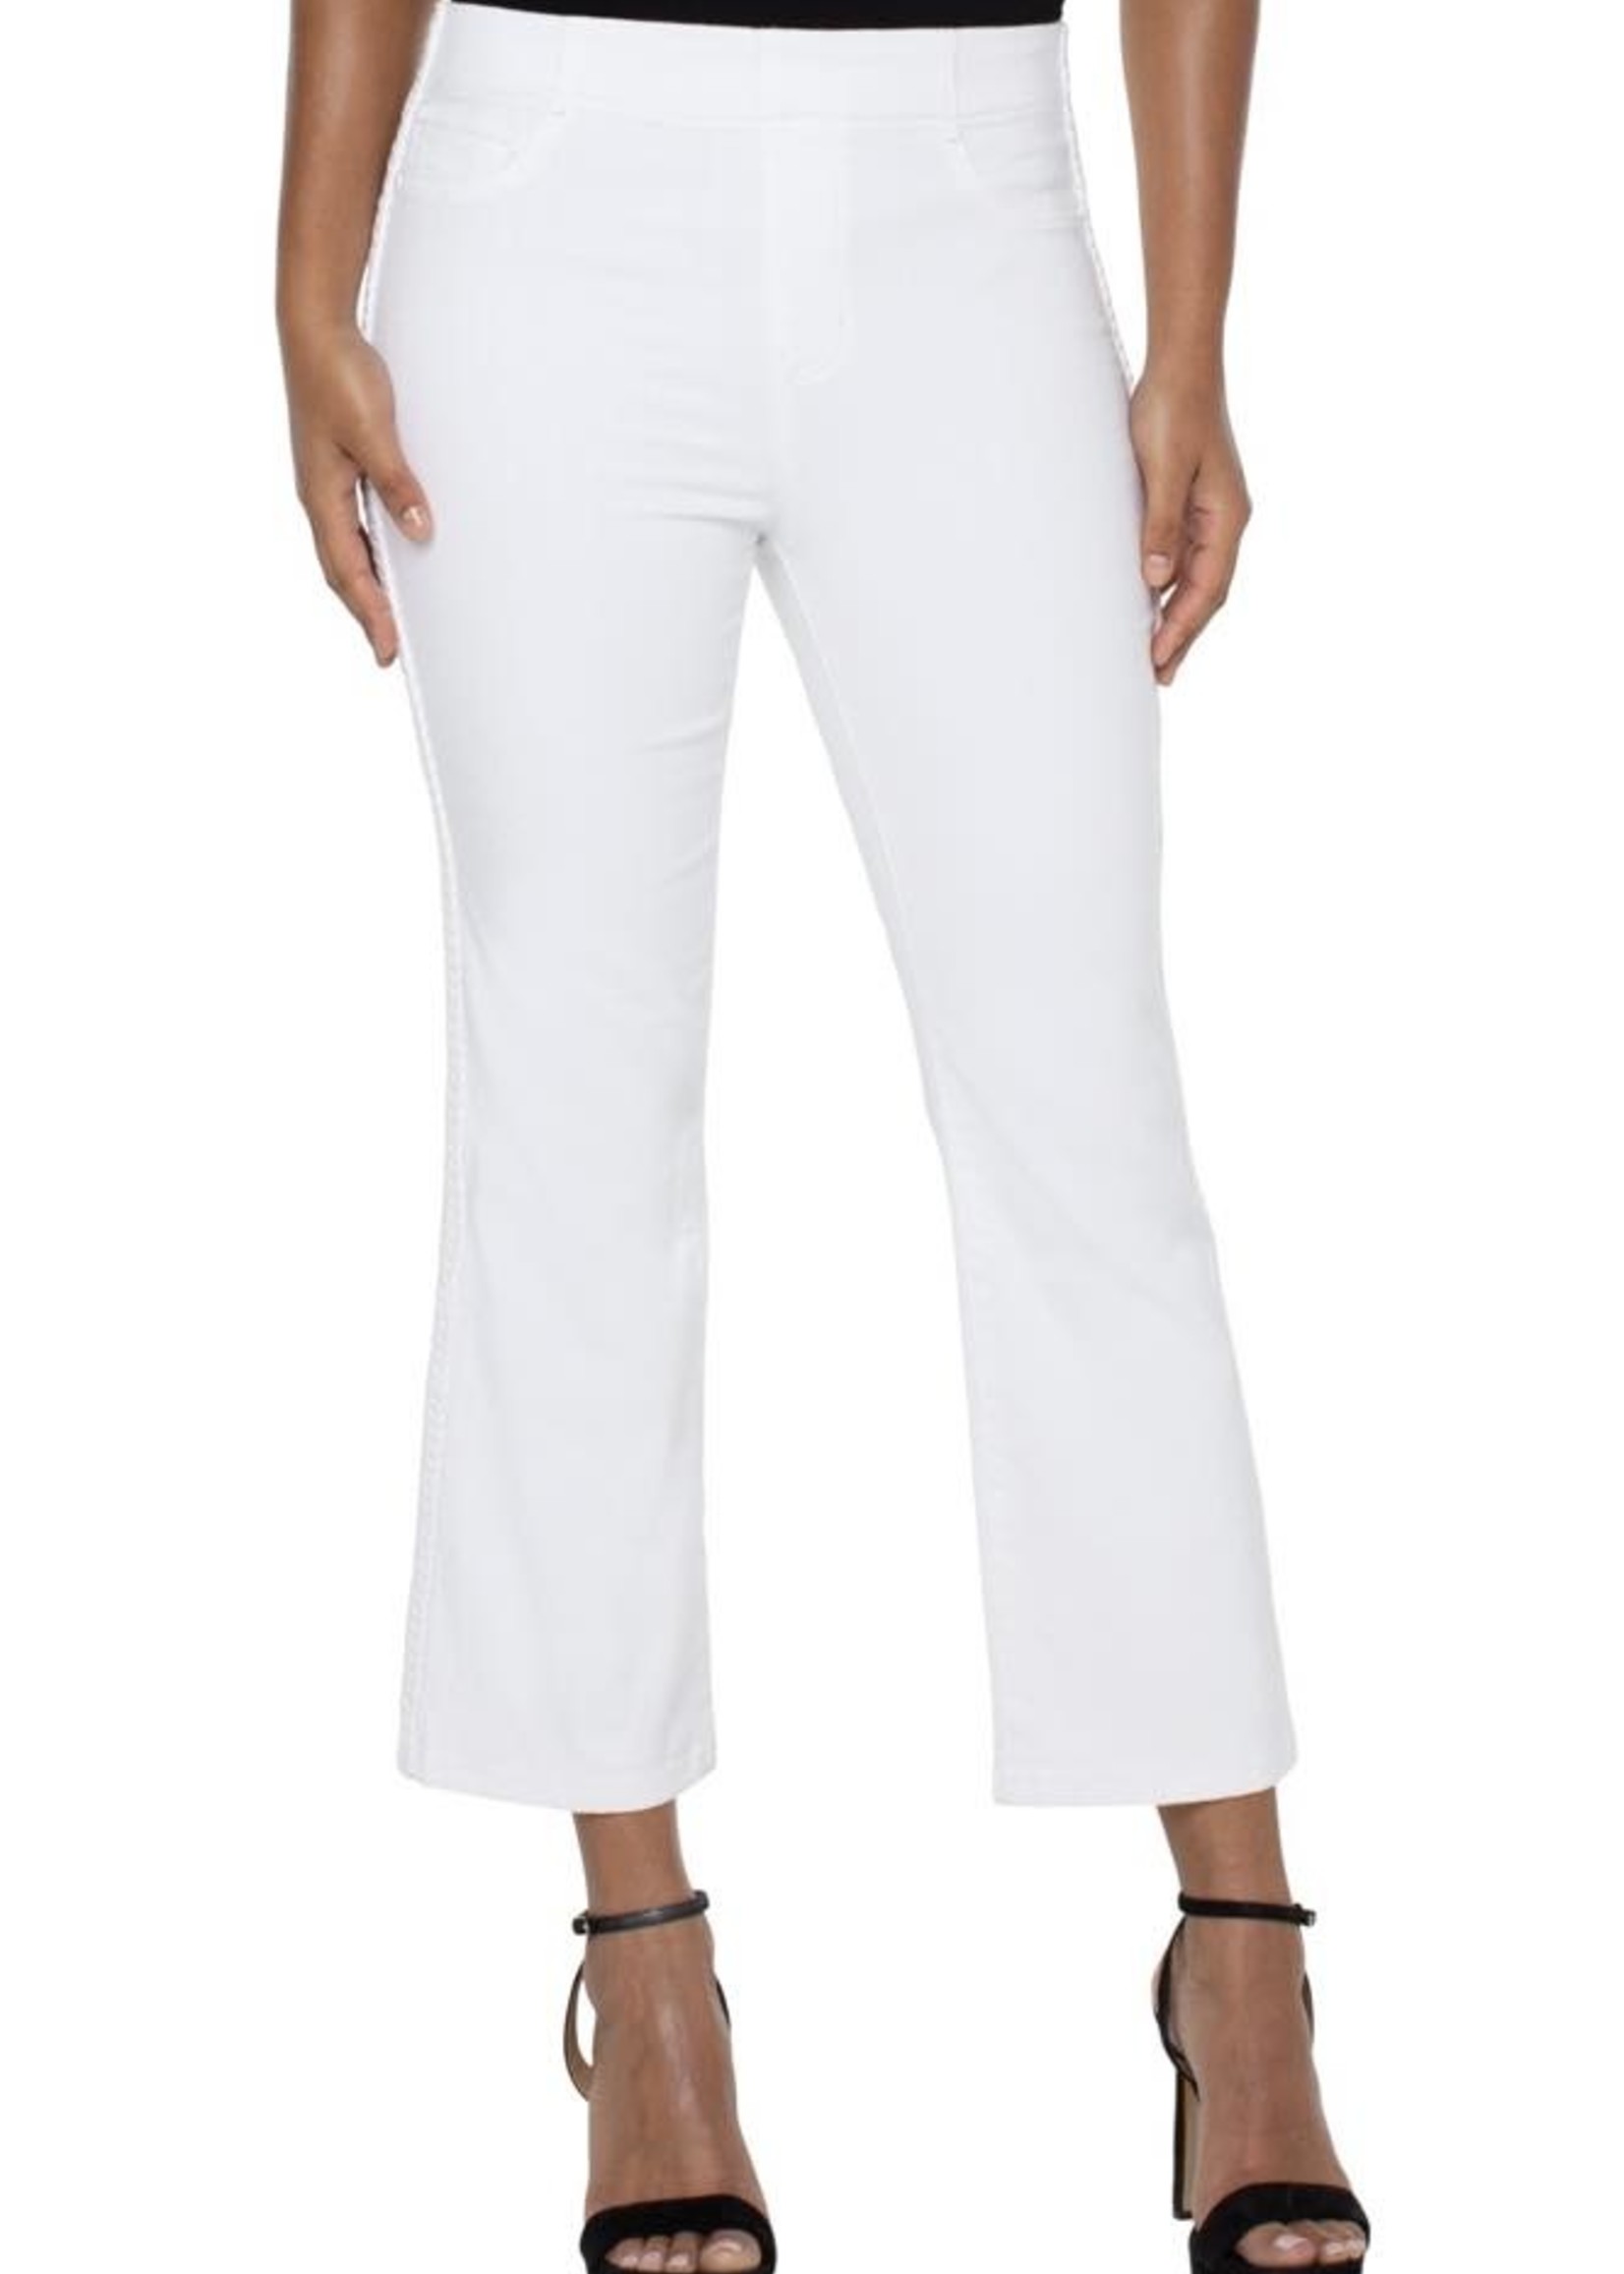 Liverpool Liverpool Chloe crop flare with braid detail - white